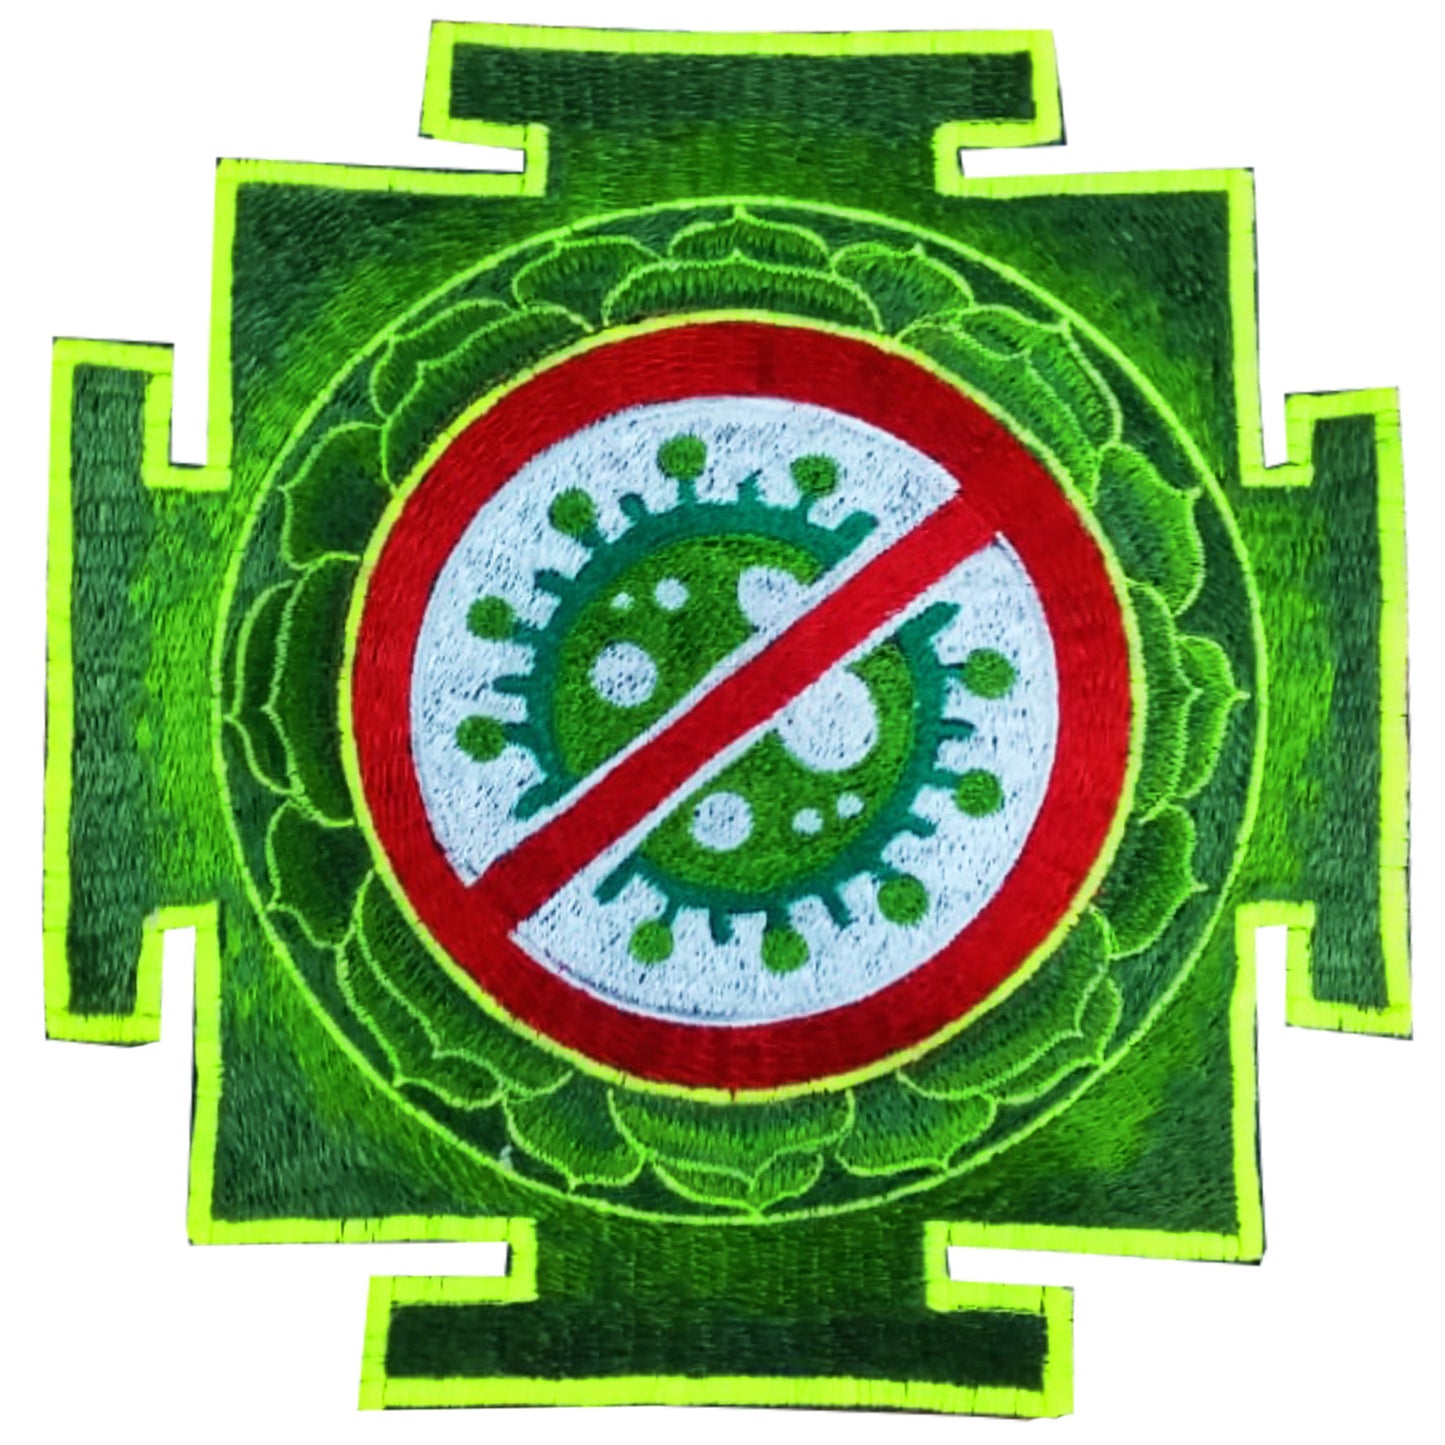 Antivirus T-Shirt Green Yantra in any size and color - sacred healing geometry - my body my choice no vax - with flower of life embroidery